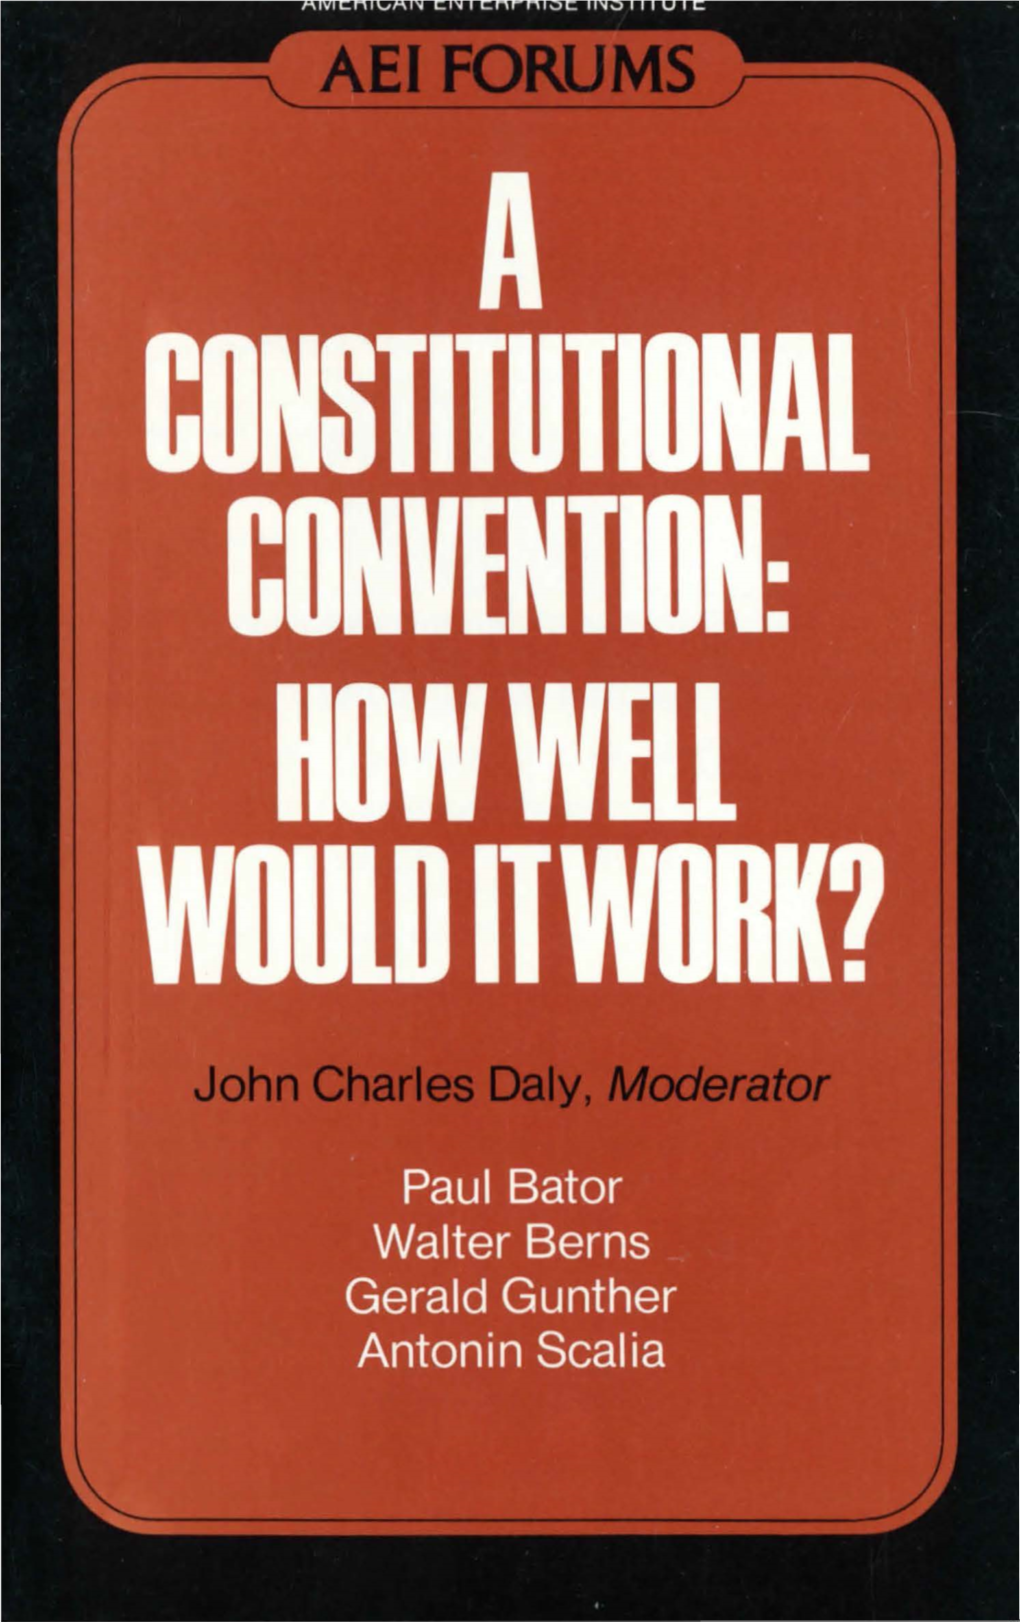 A Constitutional Convention to Propose Amendment of the U.S